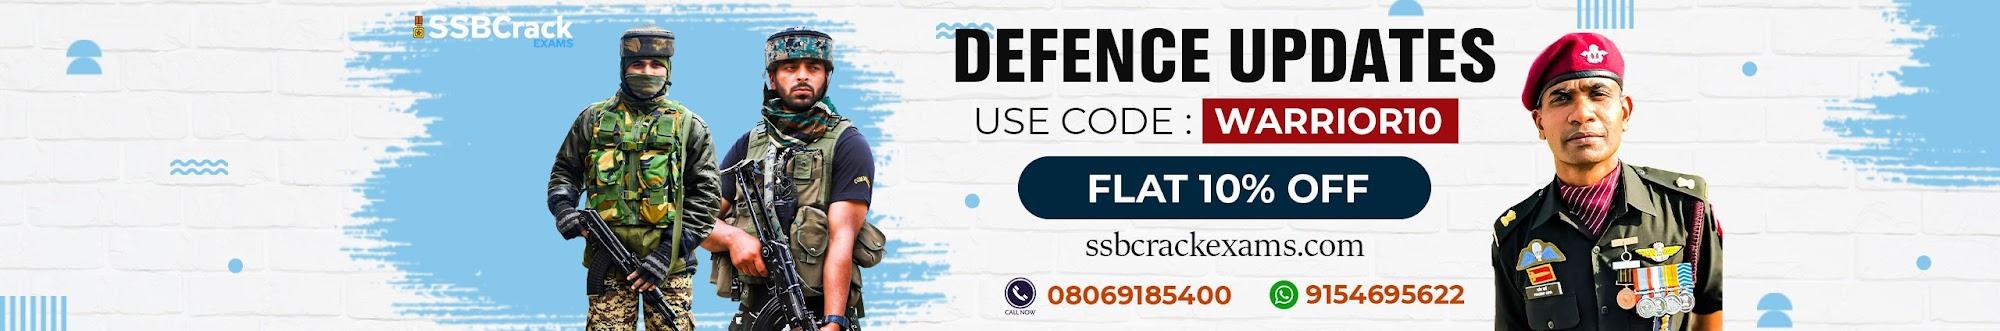 Defence Updates by SSBCrackExams